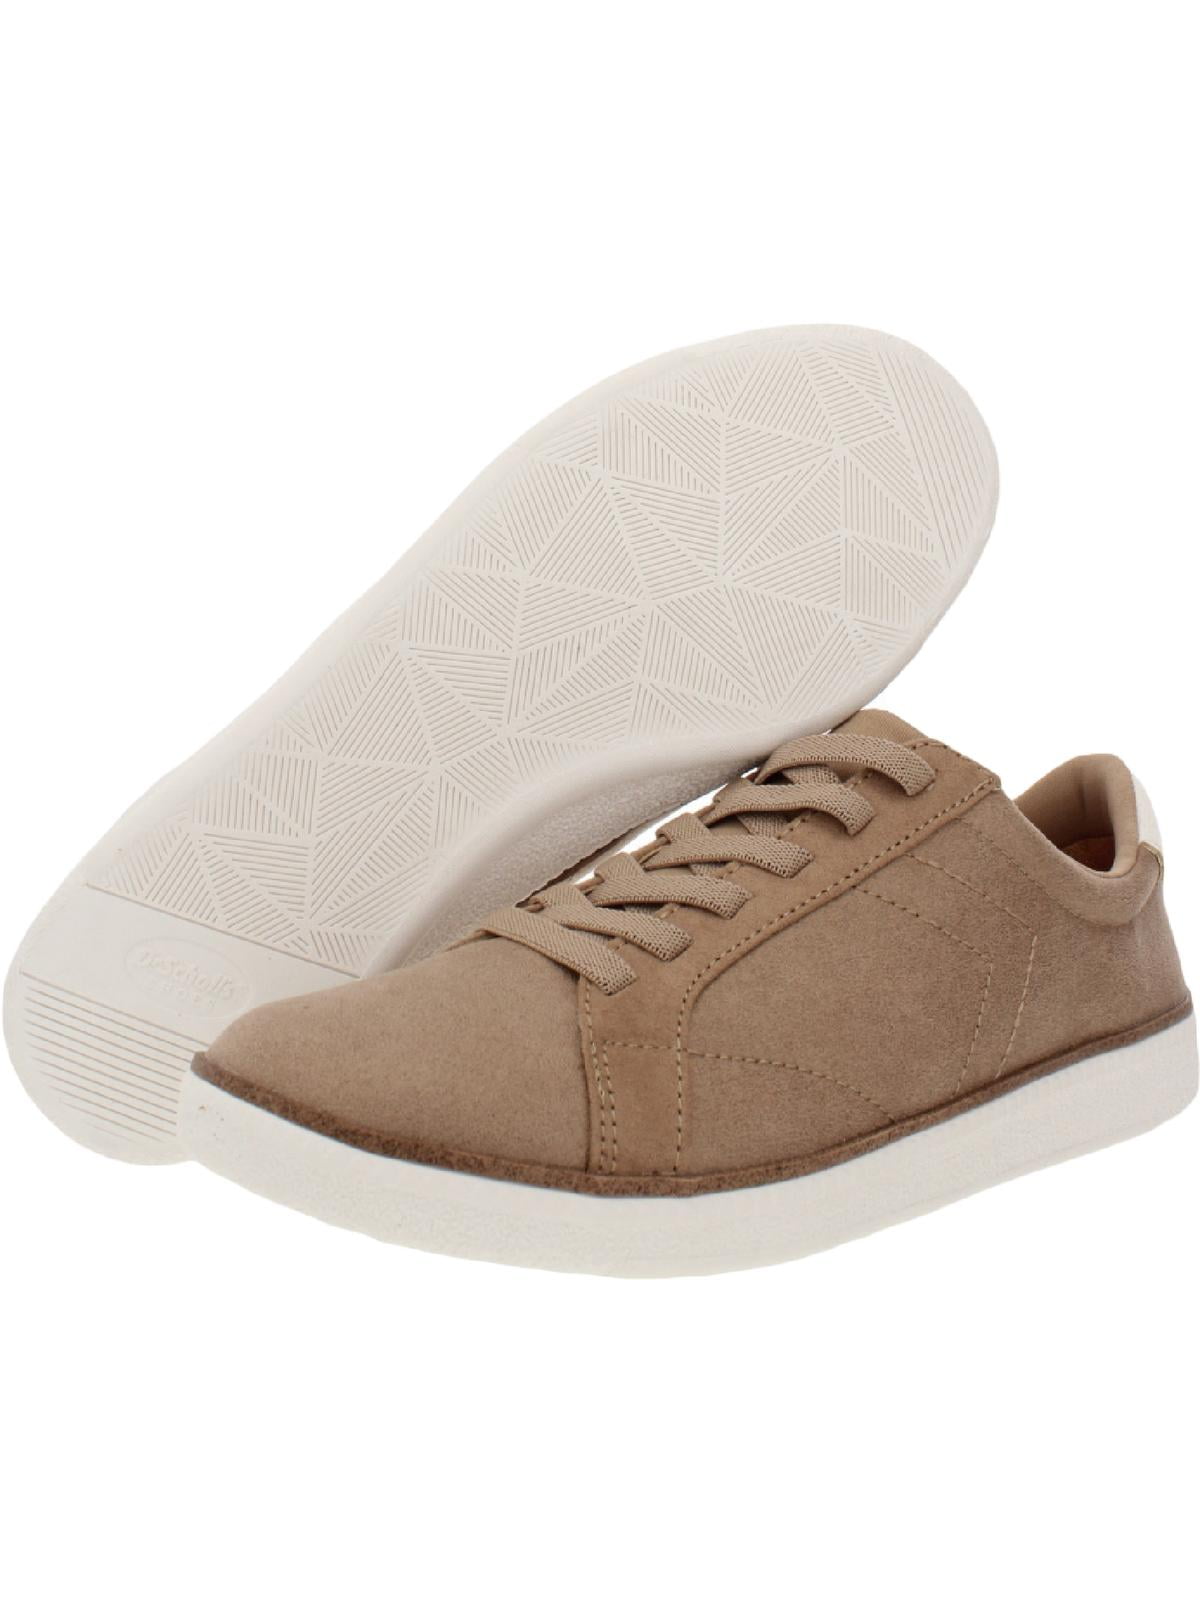 Dr. Scholl's Seaside Women's Lace-Up Low Cushioned Sneakers Taupe Size 8.5W -